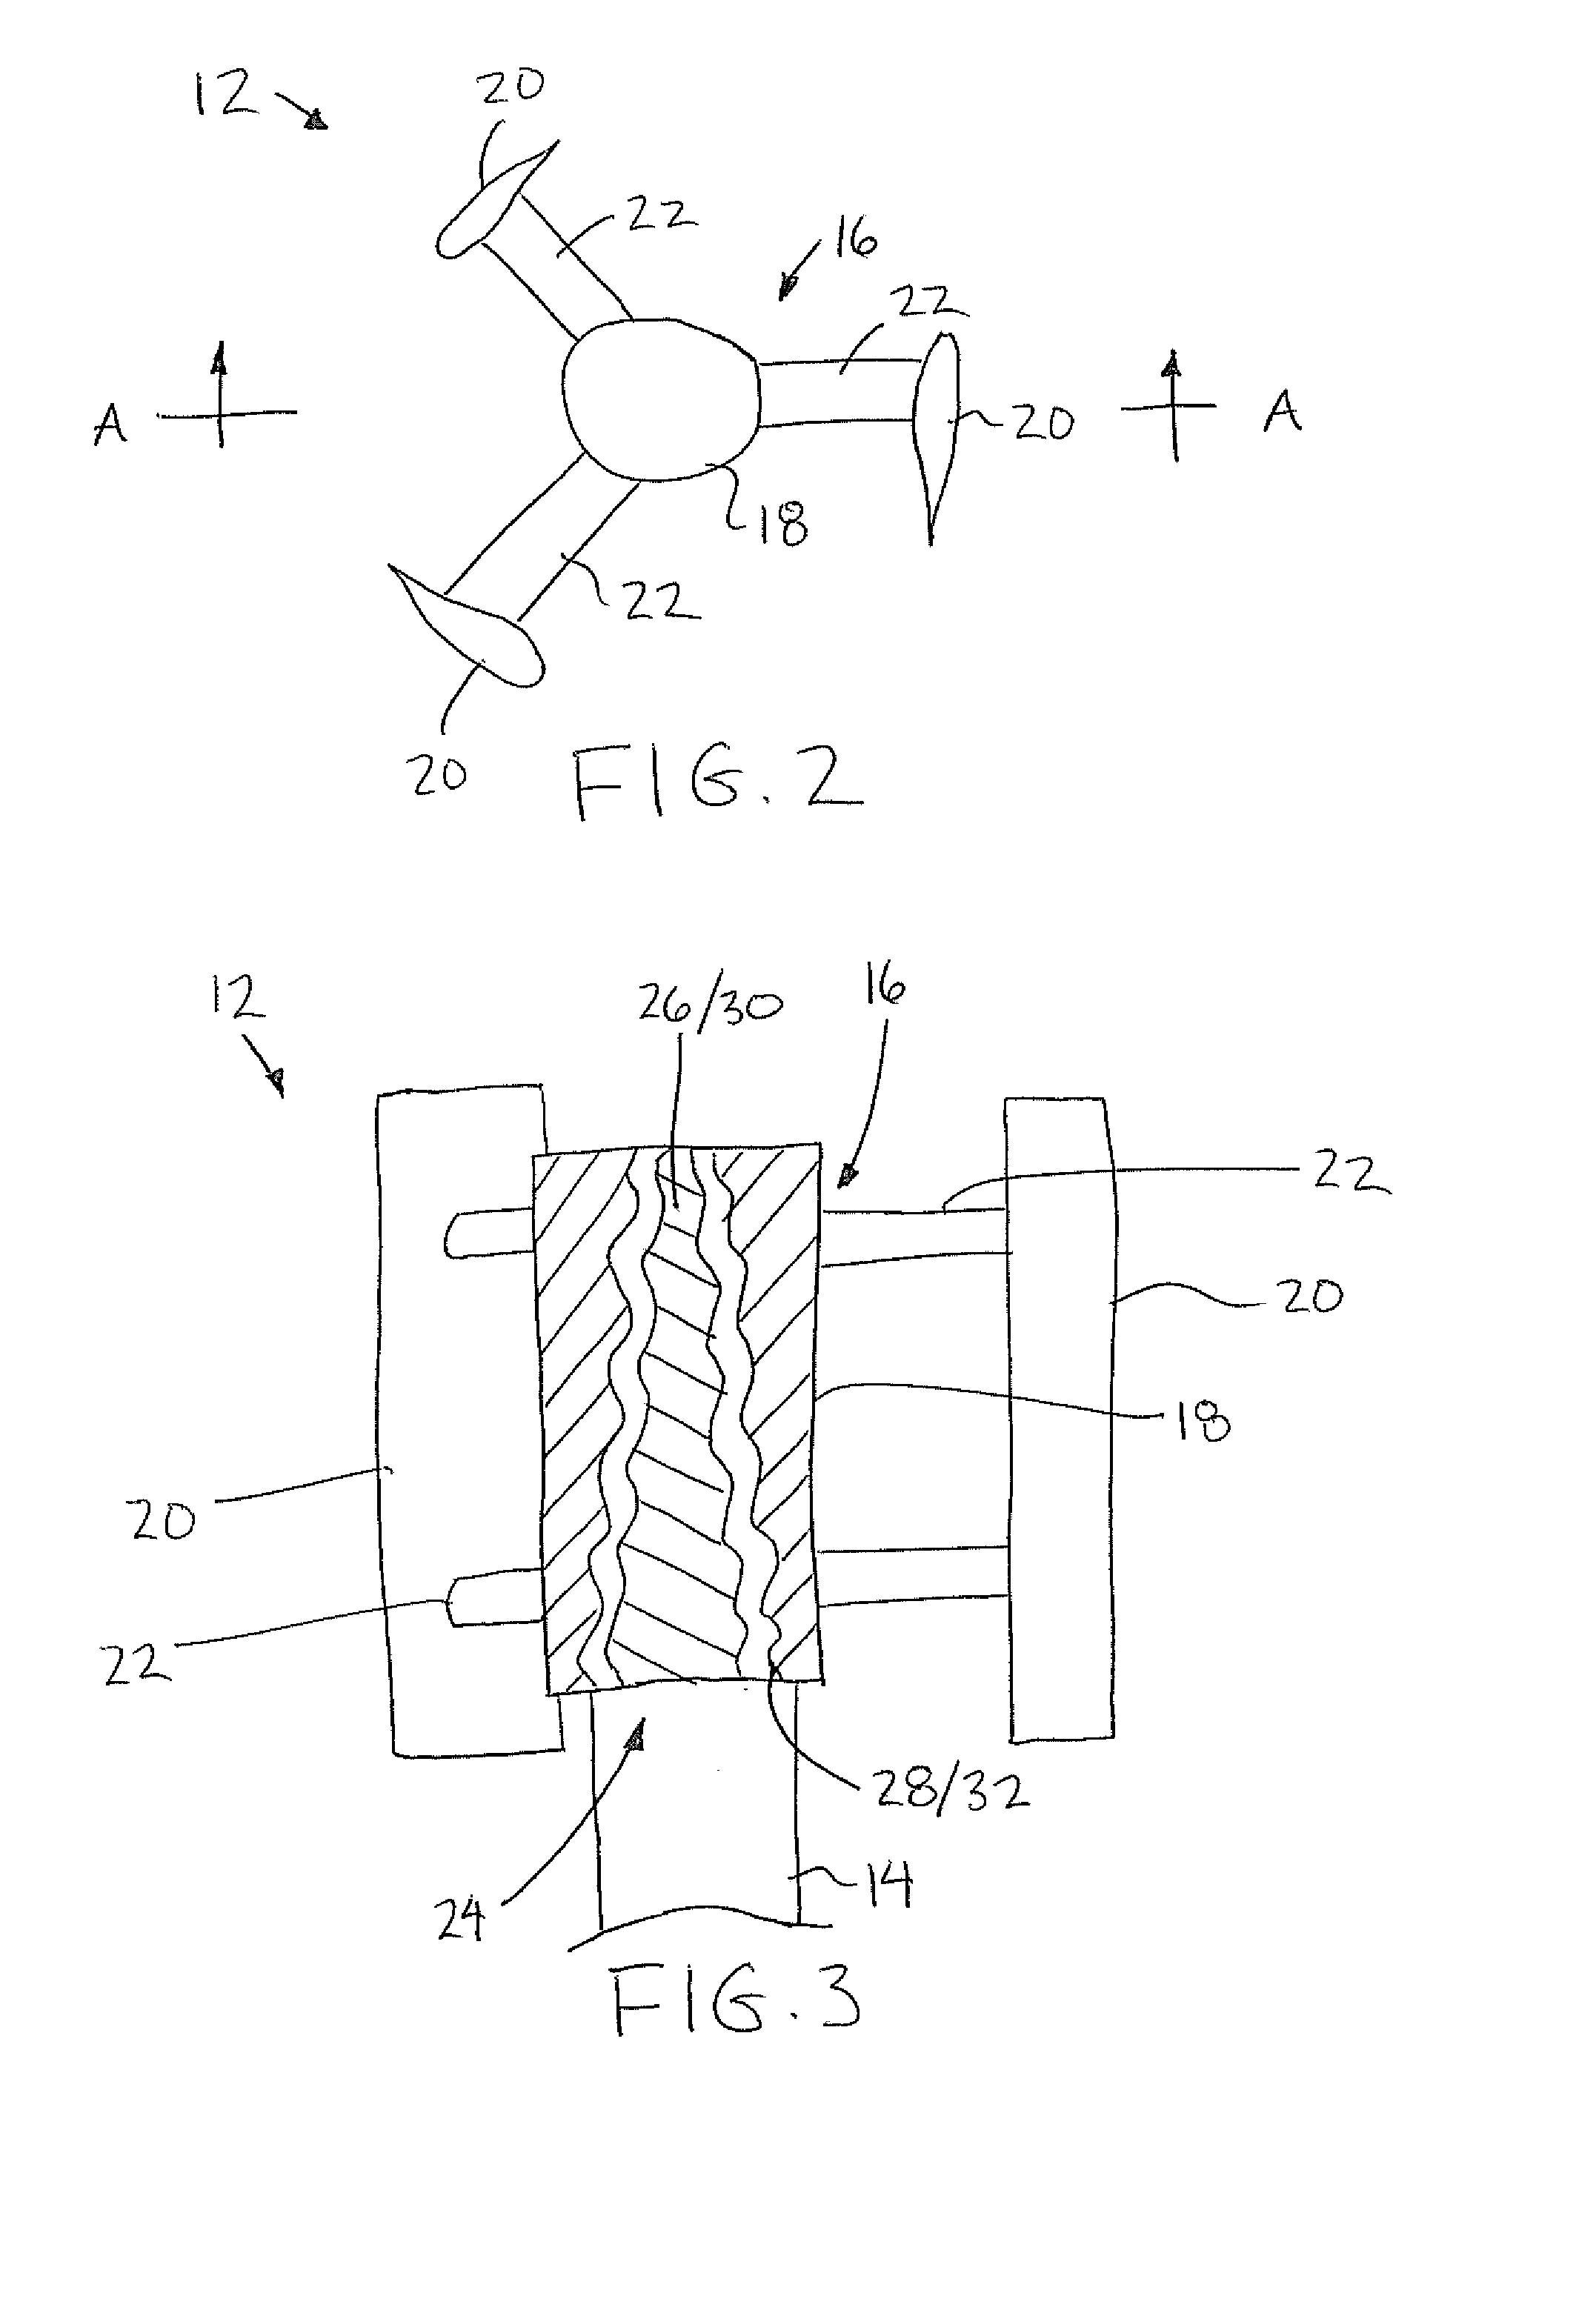 Wind Energy Generating and Storing System